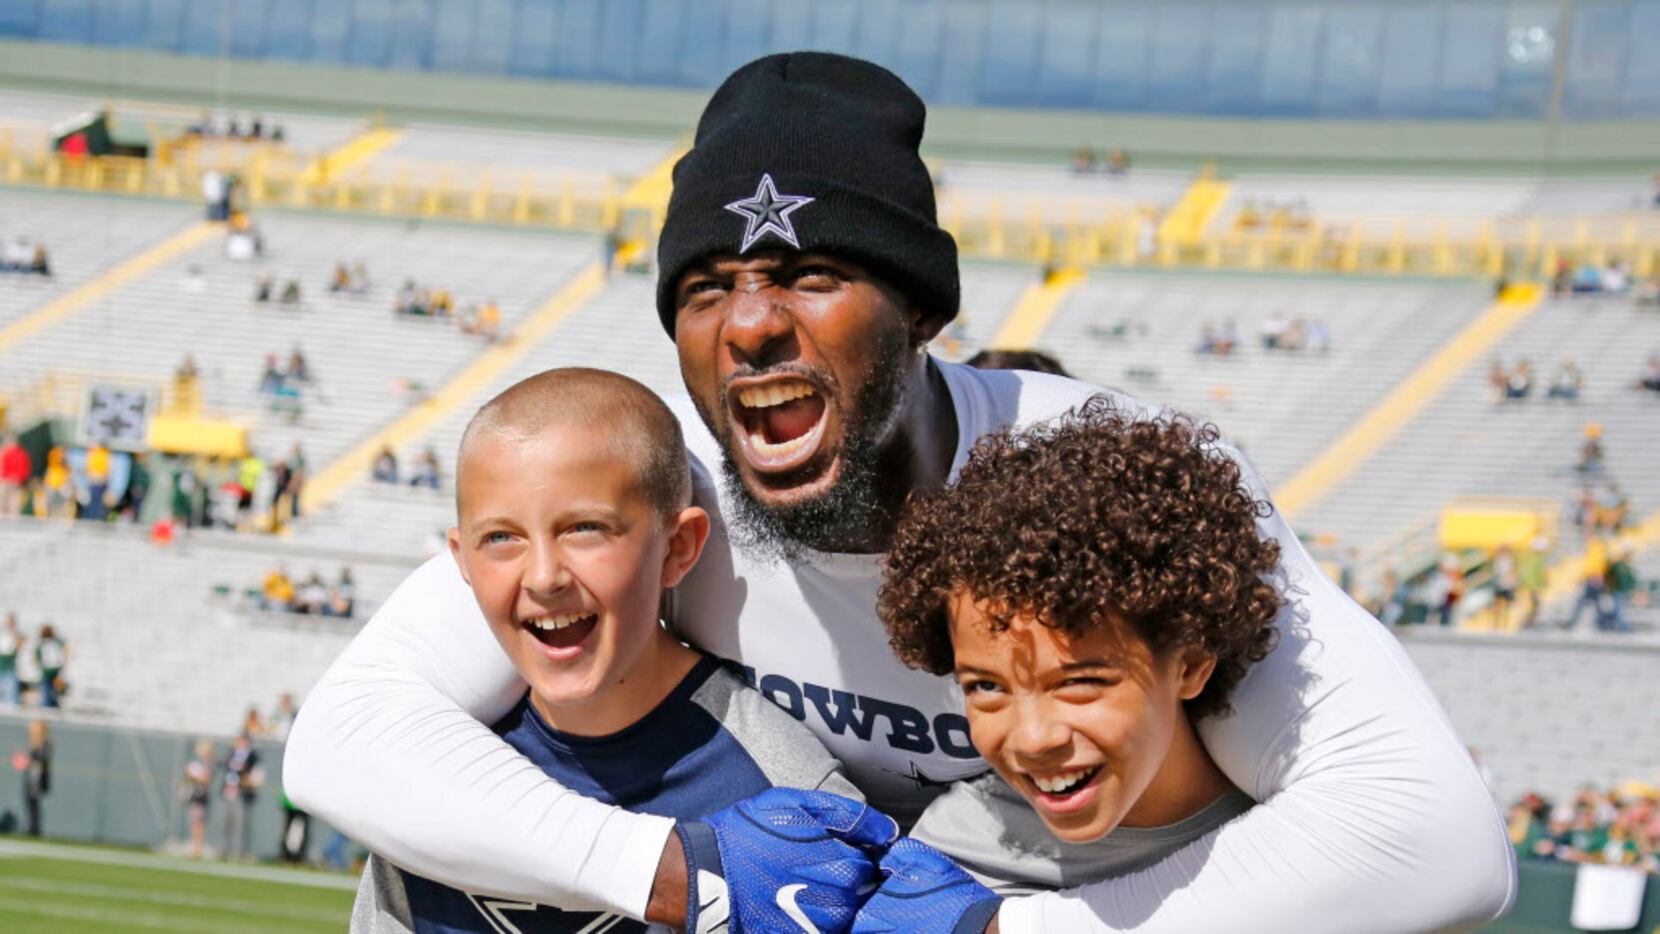 Dallas Cowboys wide receiver Dez Bryant (88) poses for a photo with youngsters Brock...